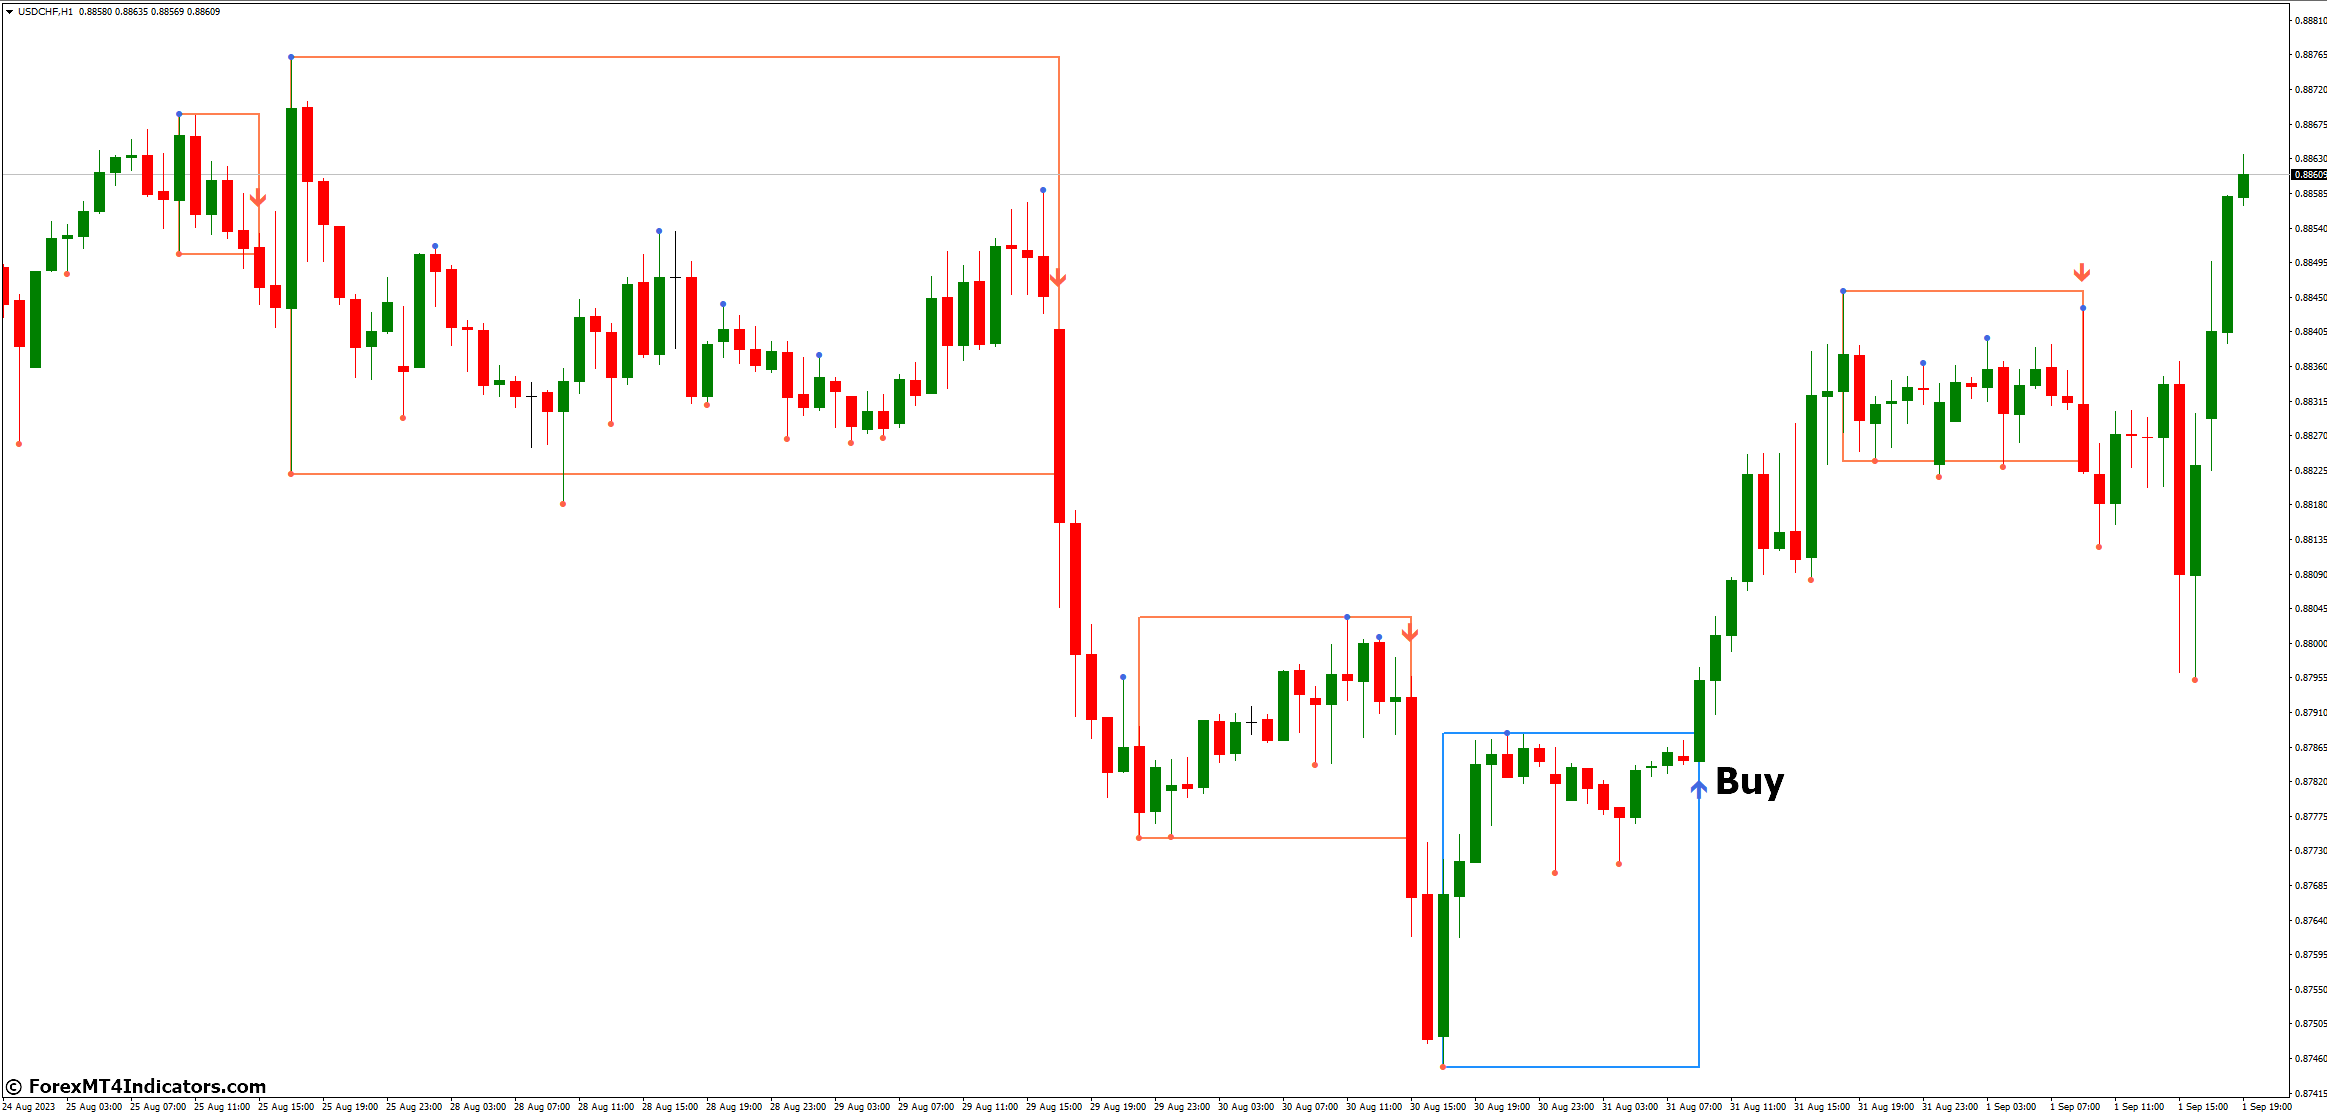 How to Trade with Darvas Boxes NMC MT4 Indicator - Buy Entry